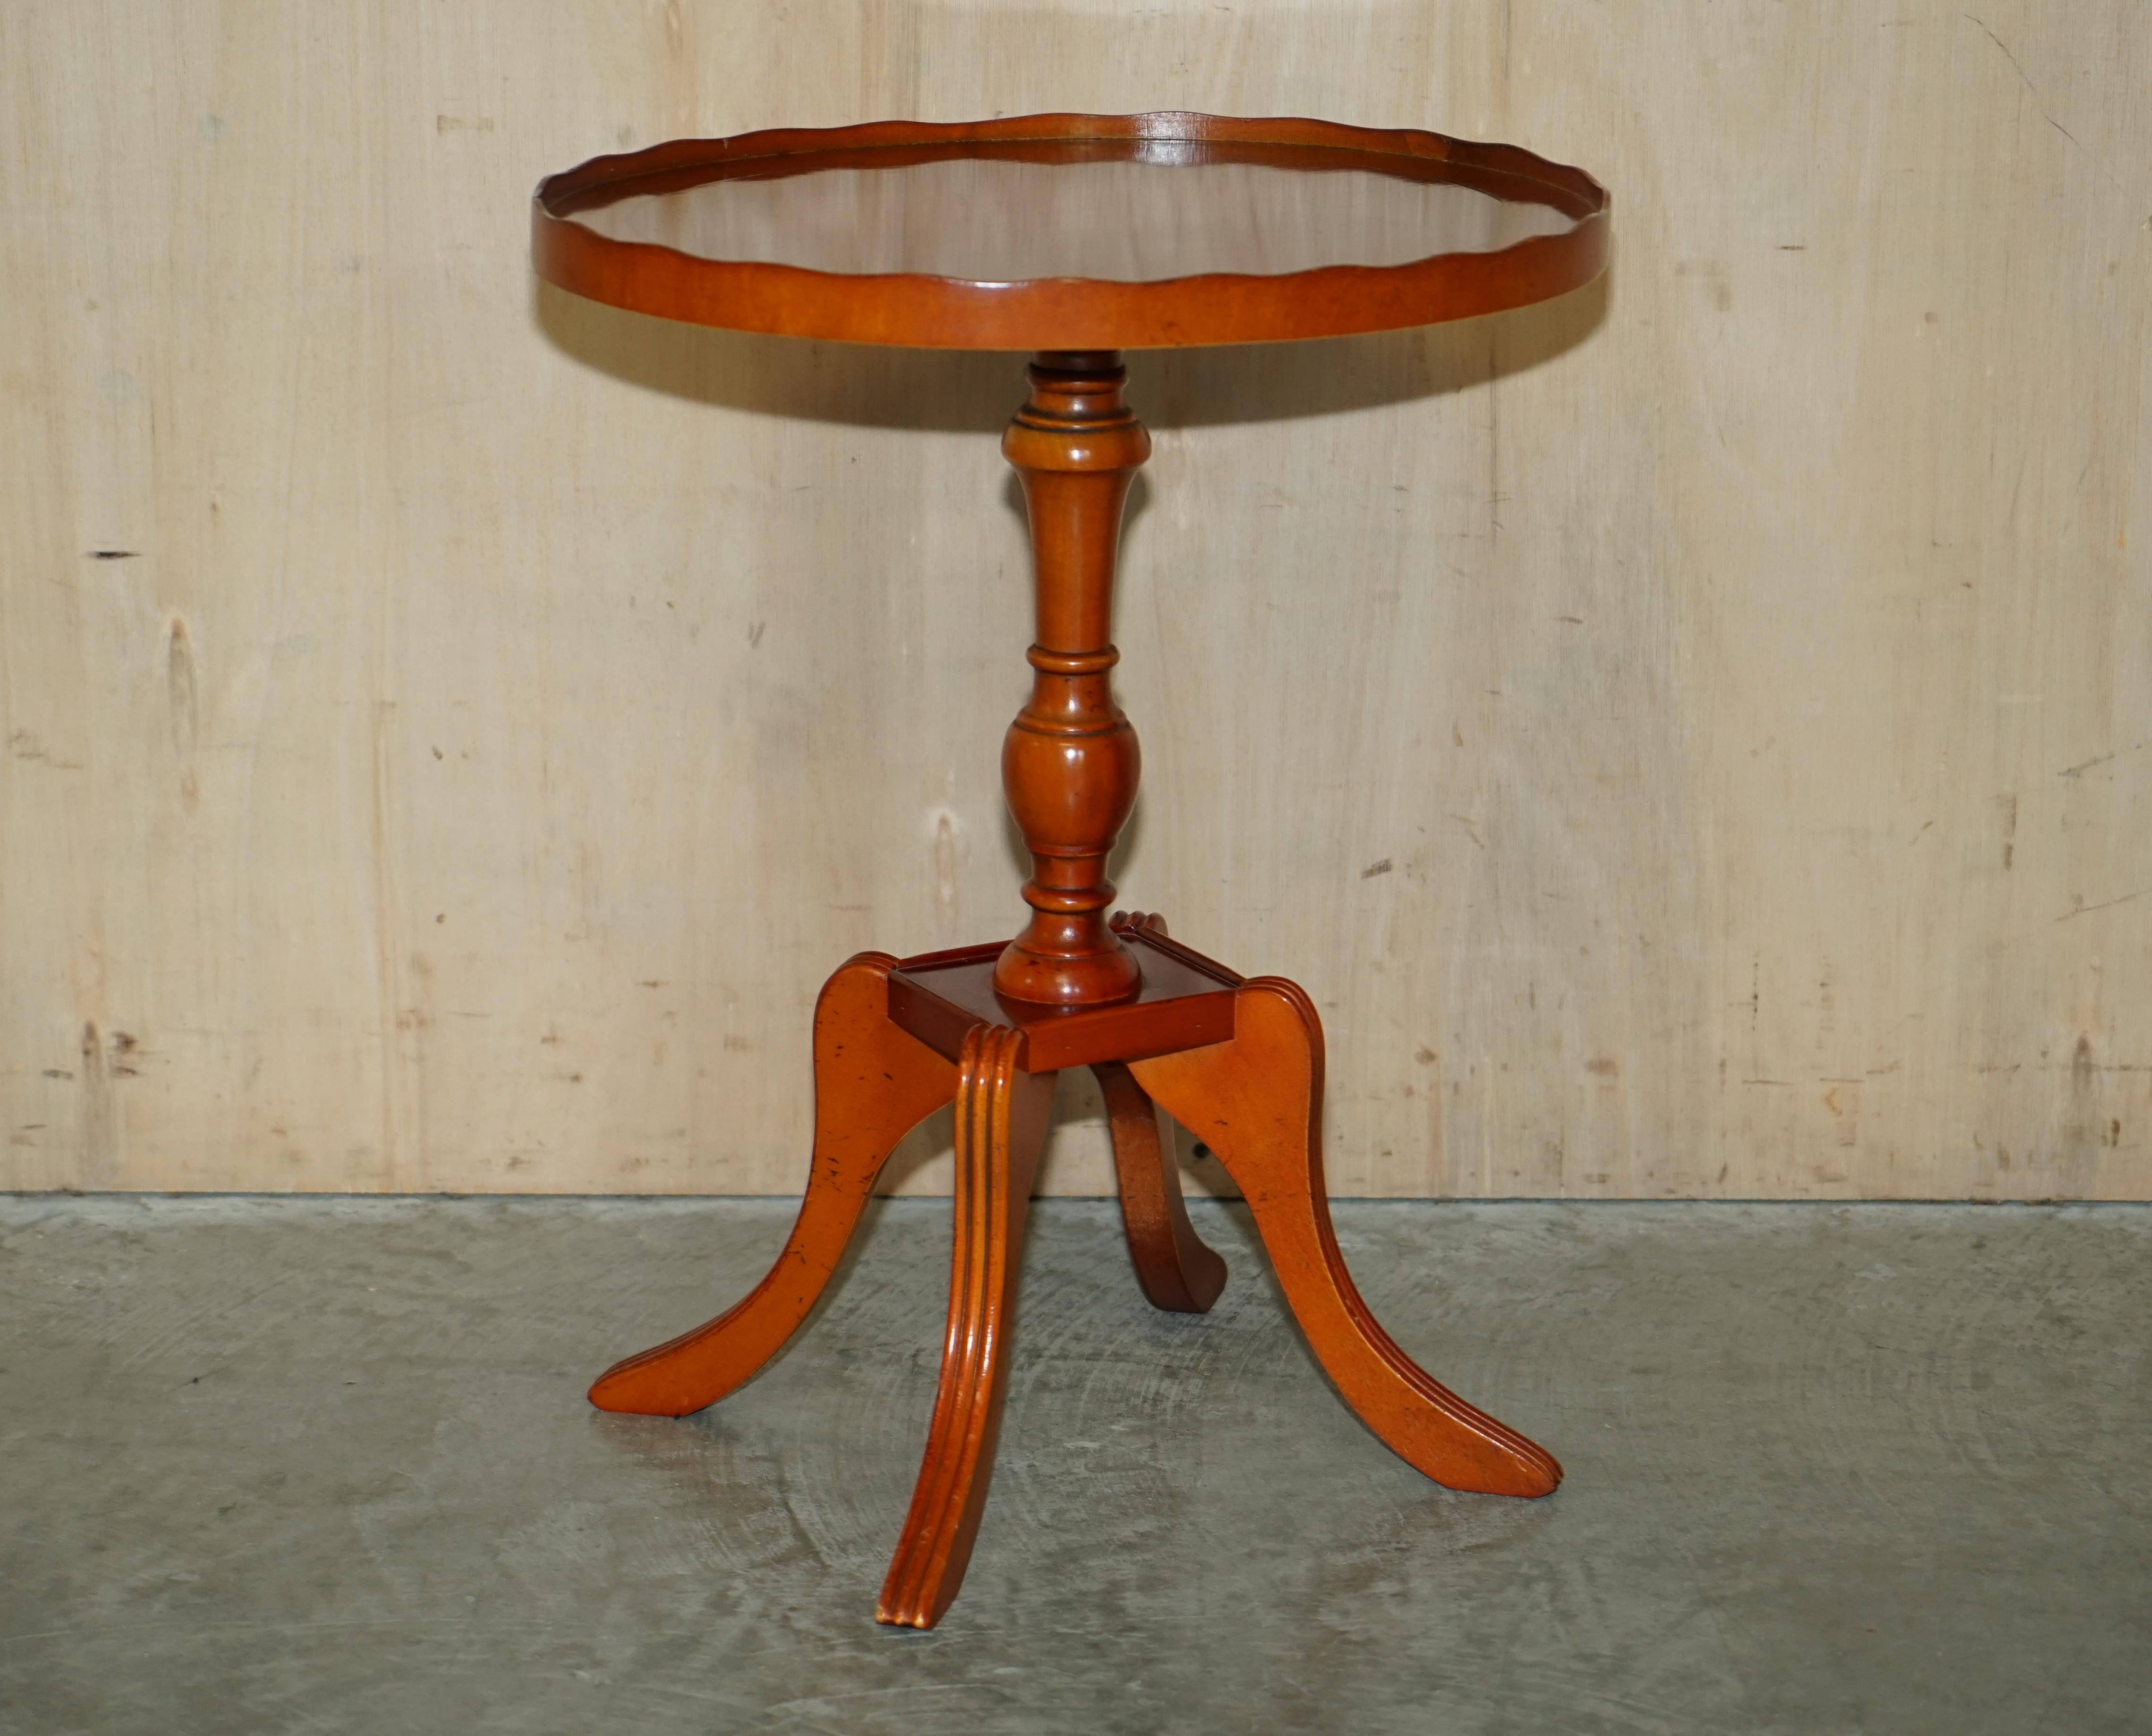 We are delighted to offer for sale this lovely hand made in England vintage Beresford & Hicks Burr Yew wood side table.

This piece is in sublime condition, the timber patina is exquisite, it has an oval top with a timber gallery rail like a